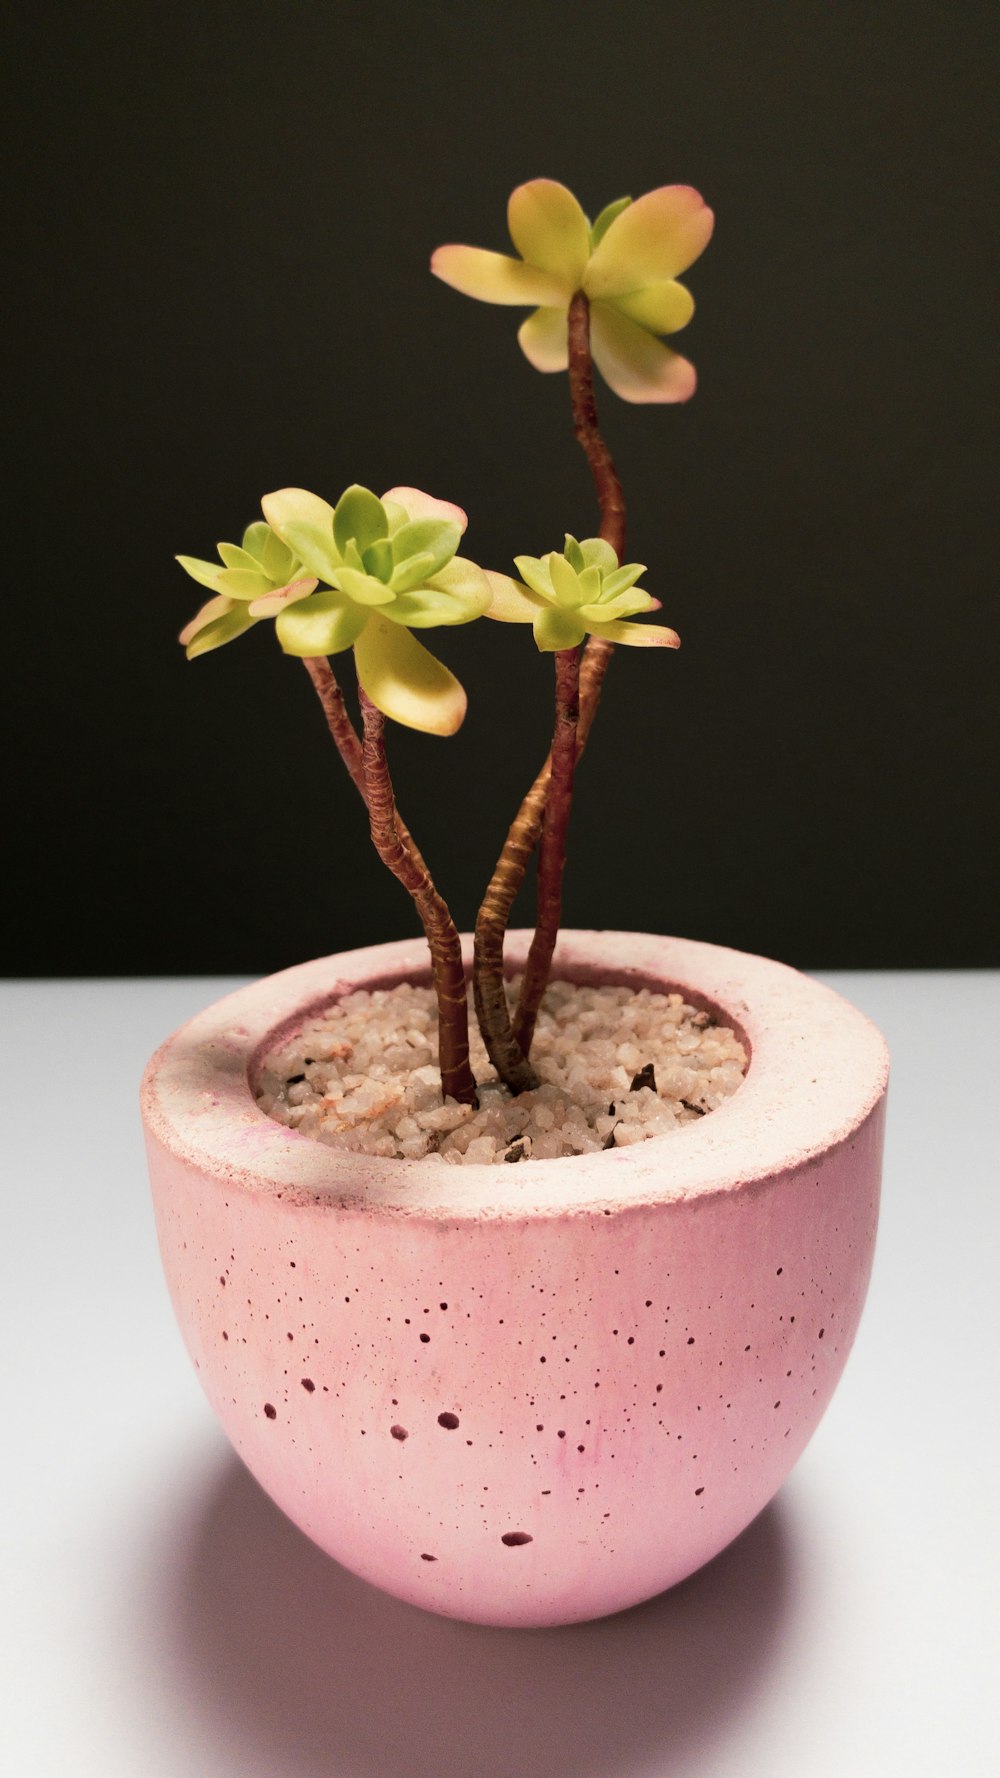 a small plant in a pink bowl on a table